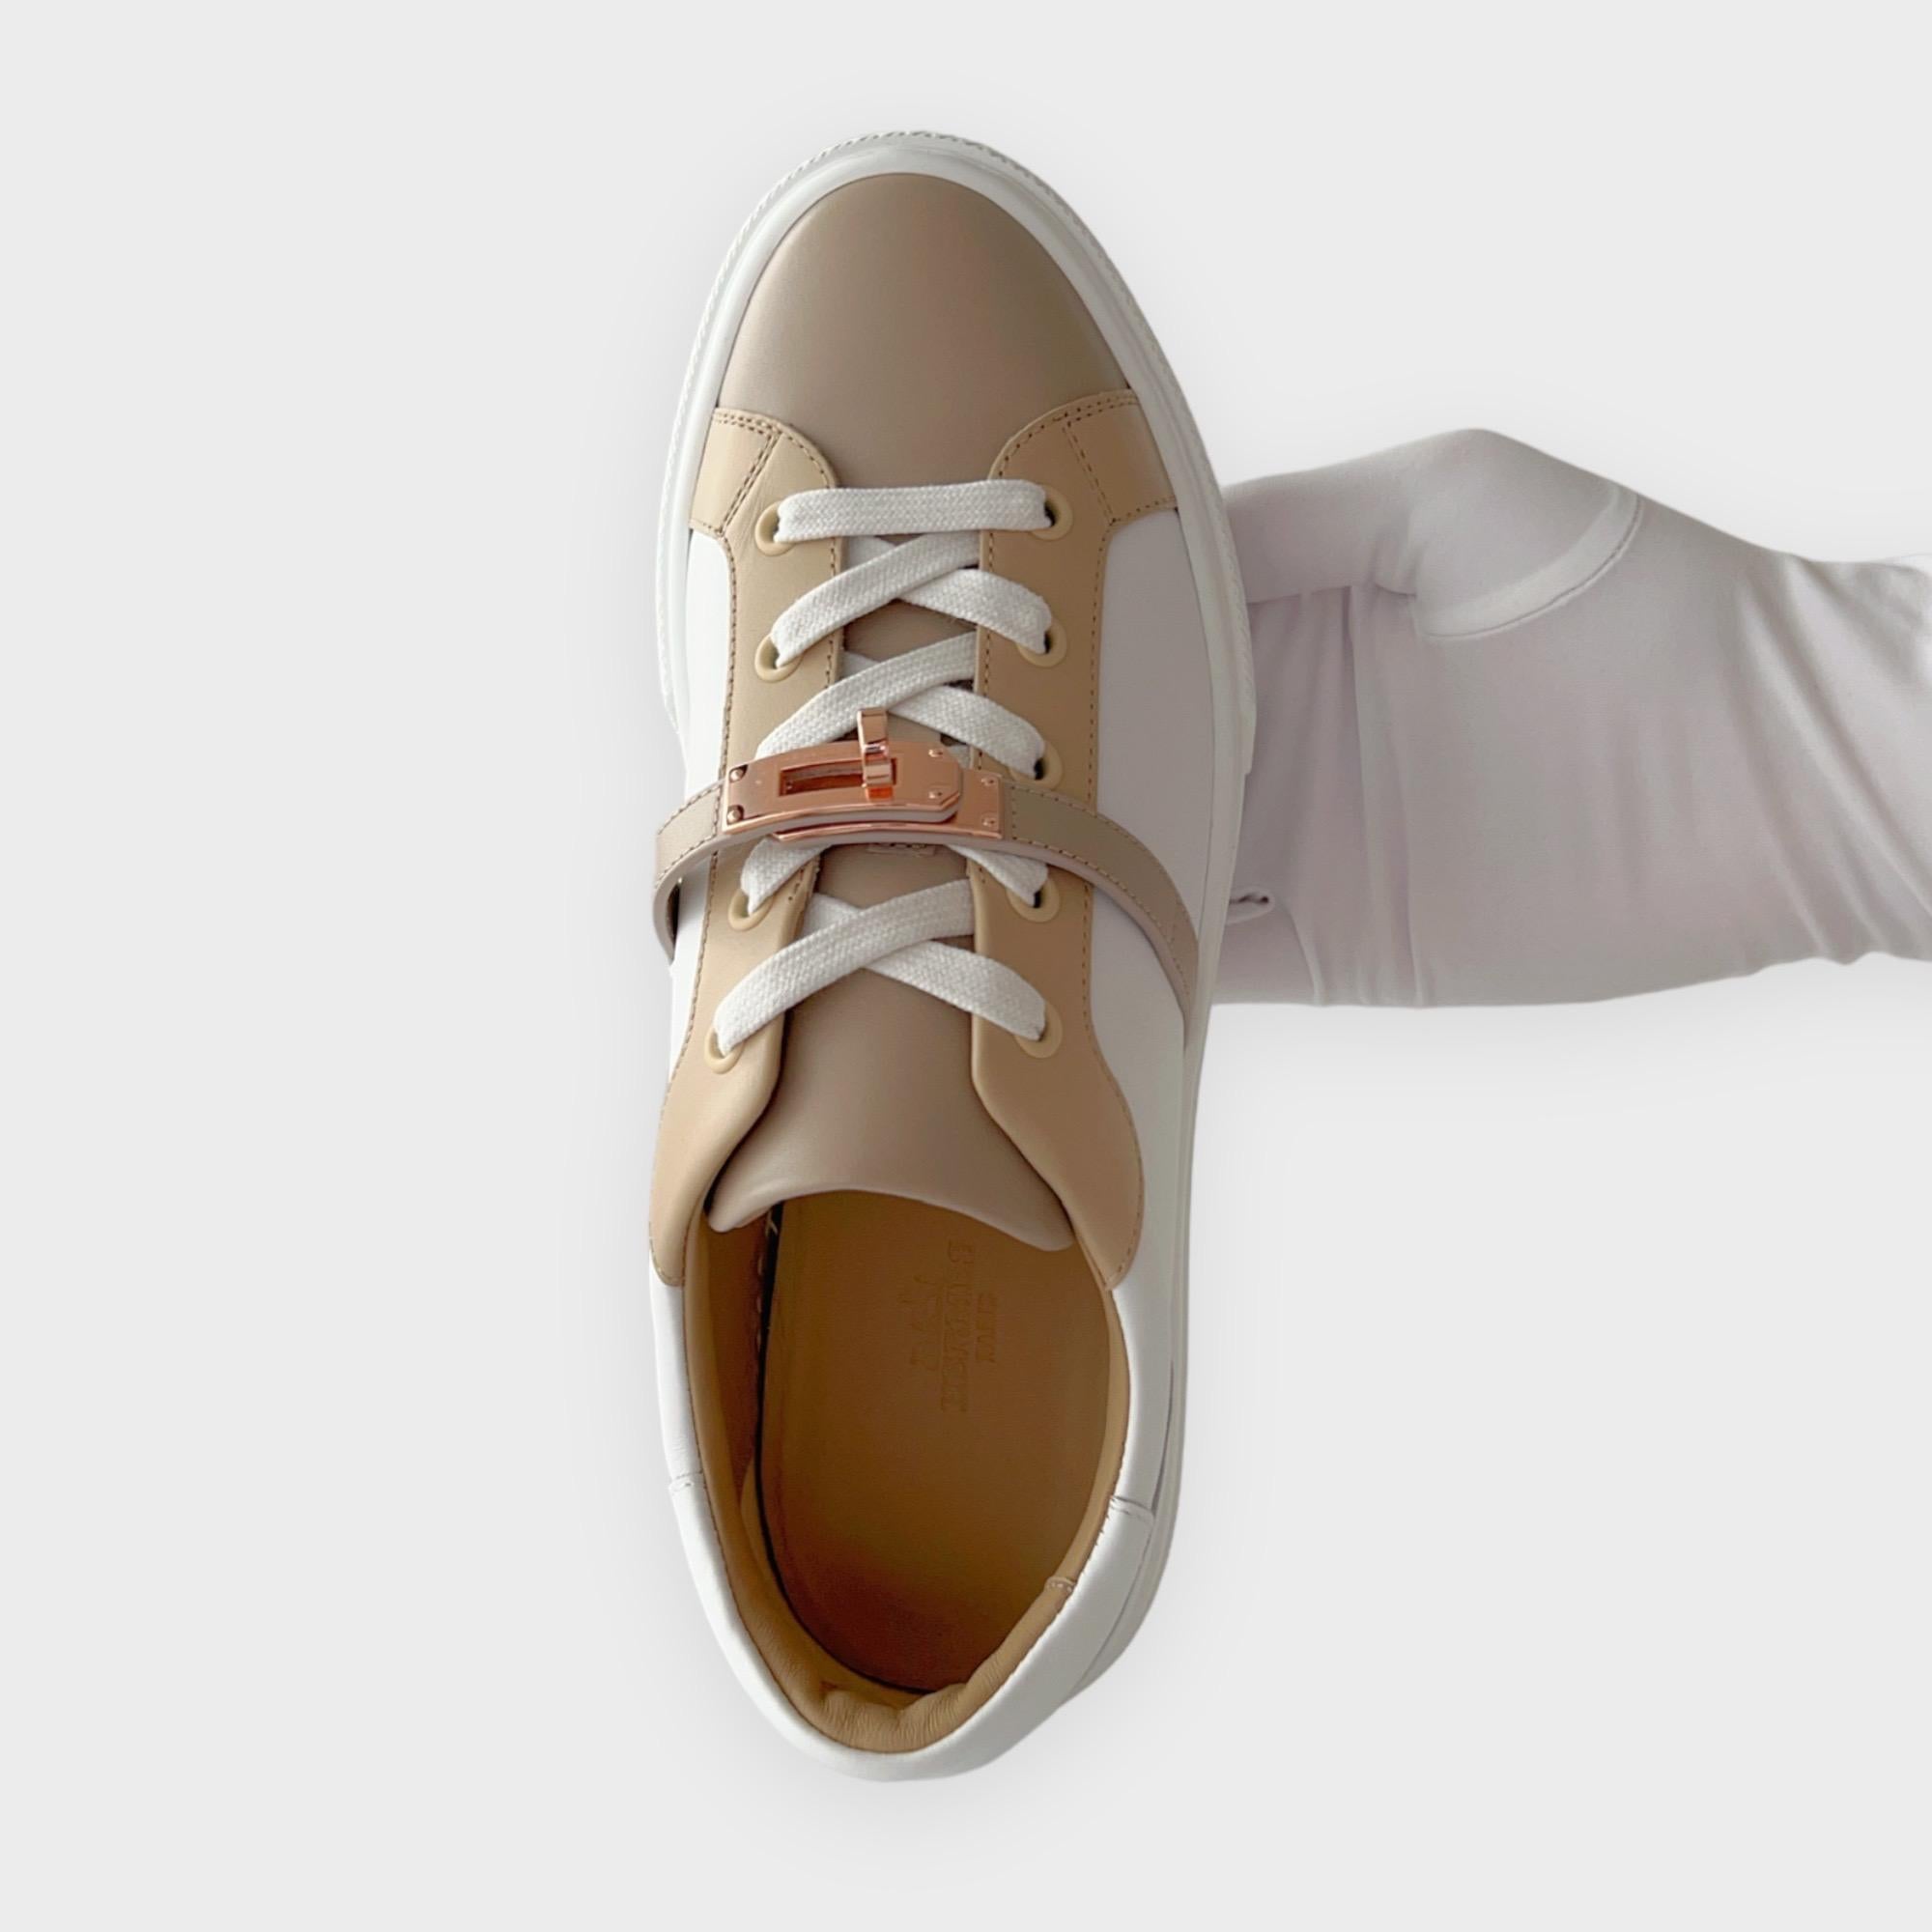 A stylish pair of the Hermes Day Sneaker in Multicolore Blanc (White And Beige) featuring the classic Kelly buckle in Rose Gold Plated Hardware. The soft calfskin leather creates a smart but modern look that you can wear throughout all seasons.